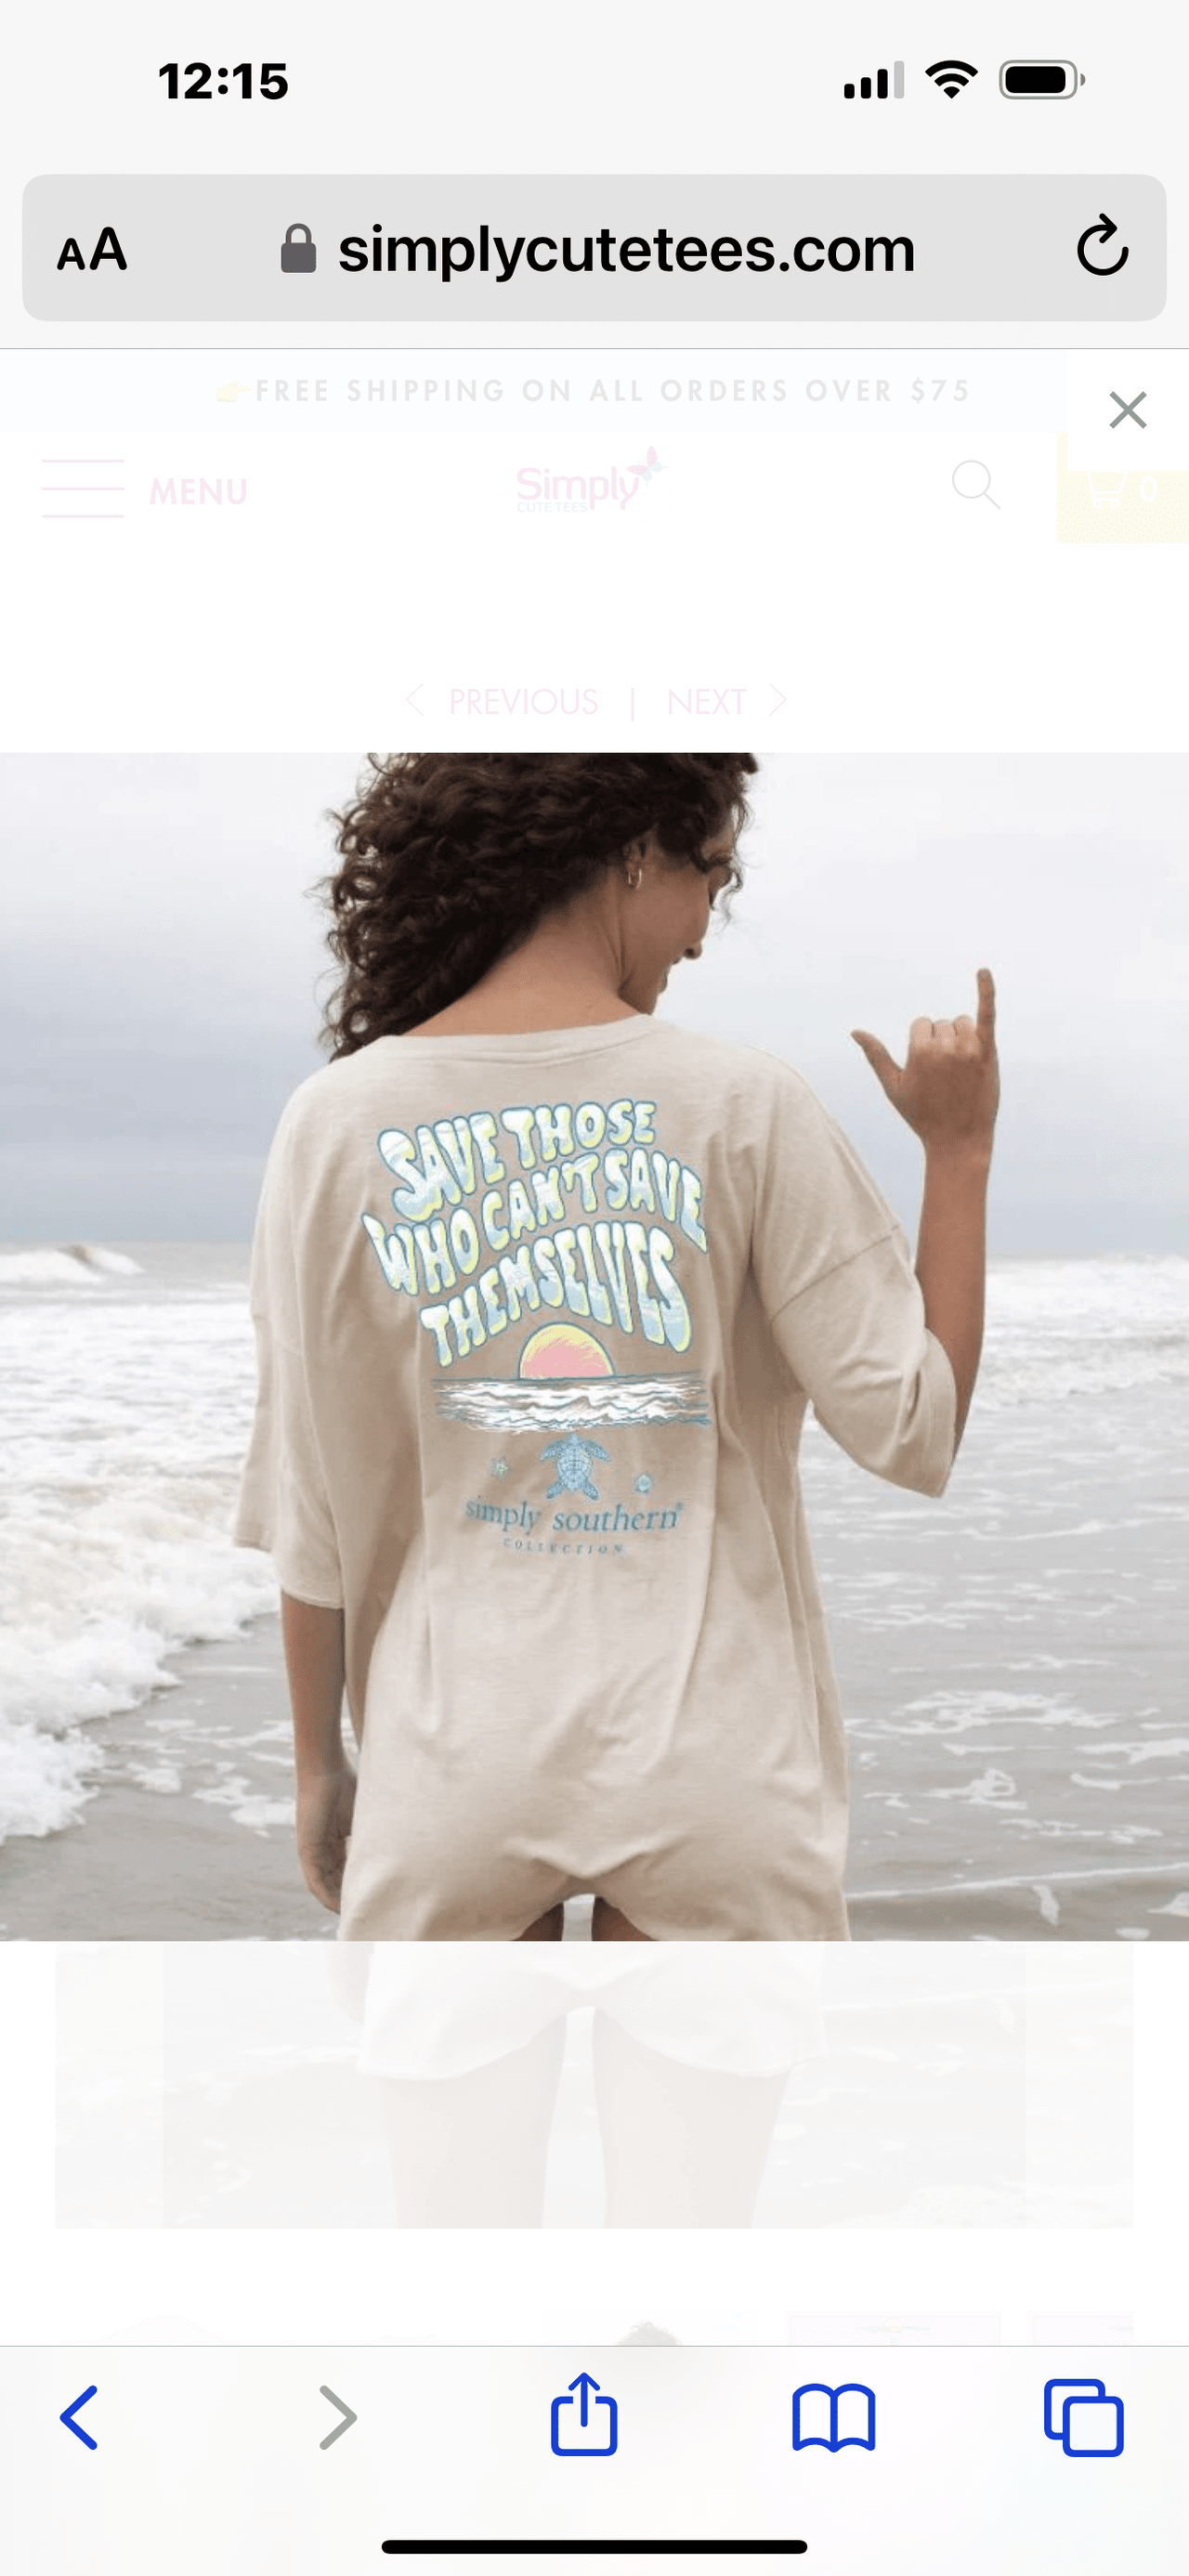 Simply Southern SS Turtle Tracker Tee Simply Southern SS TEE